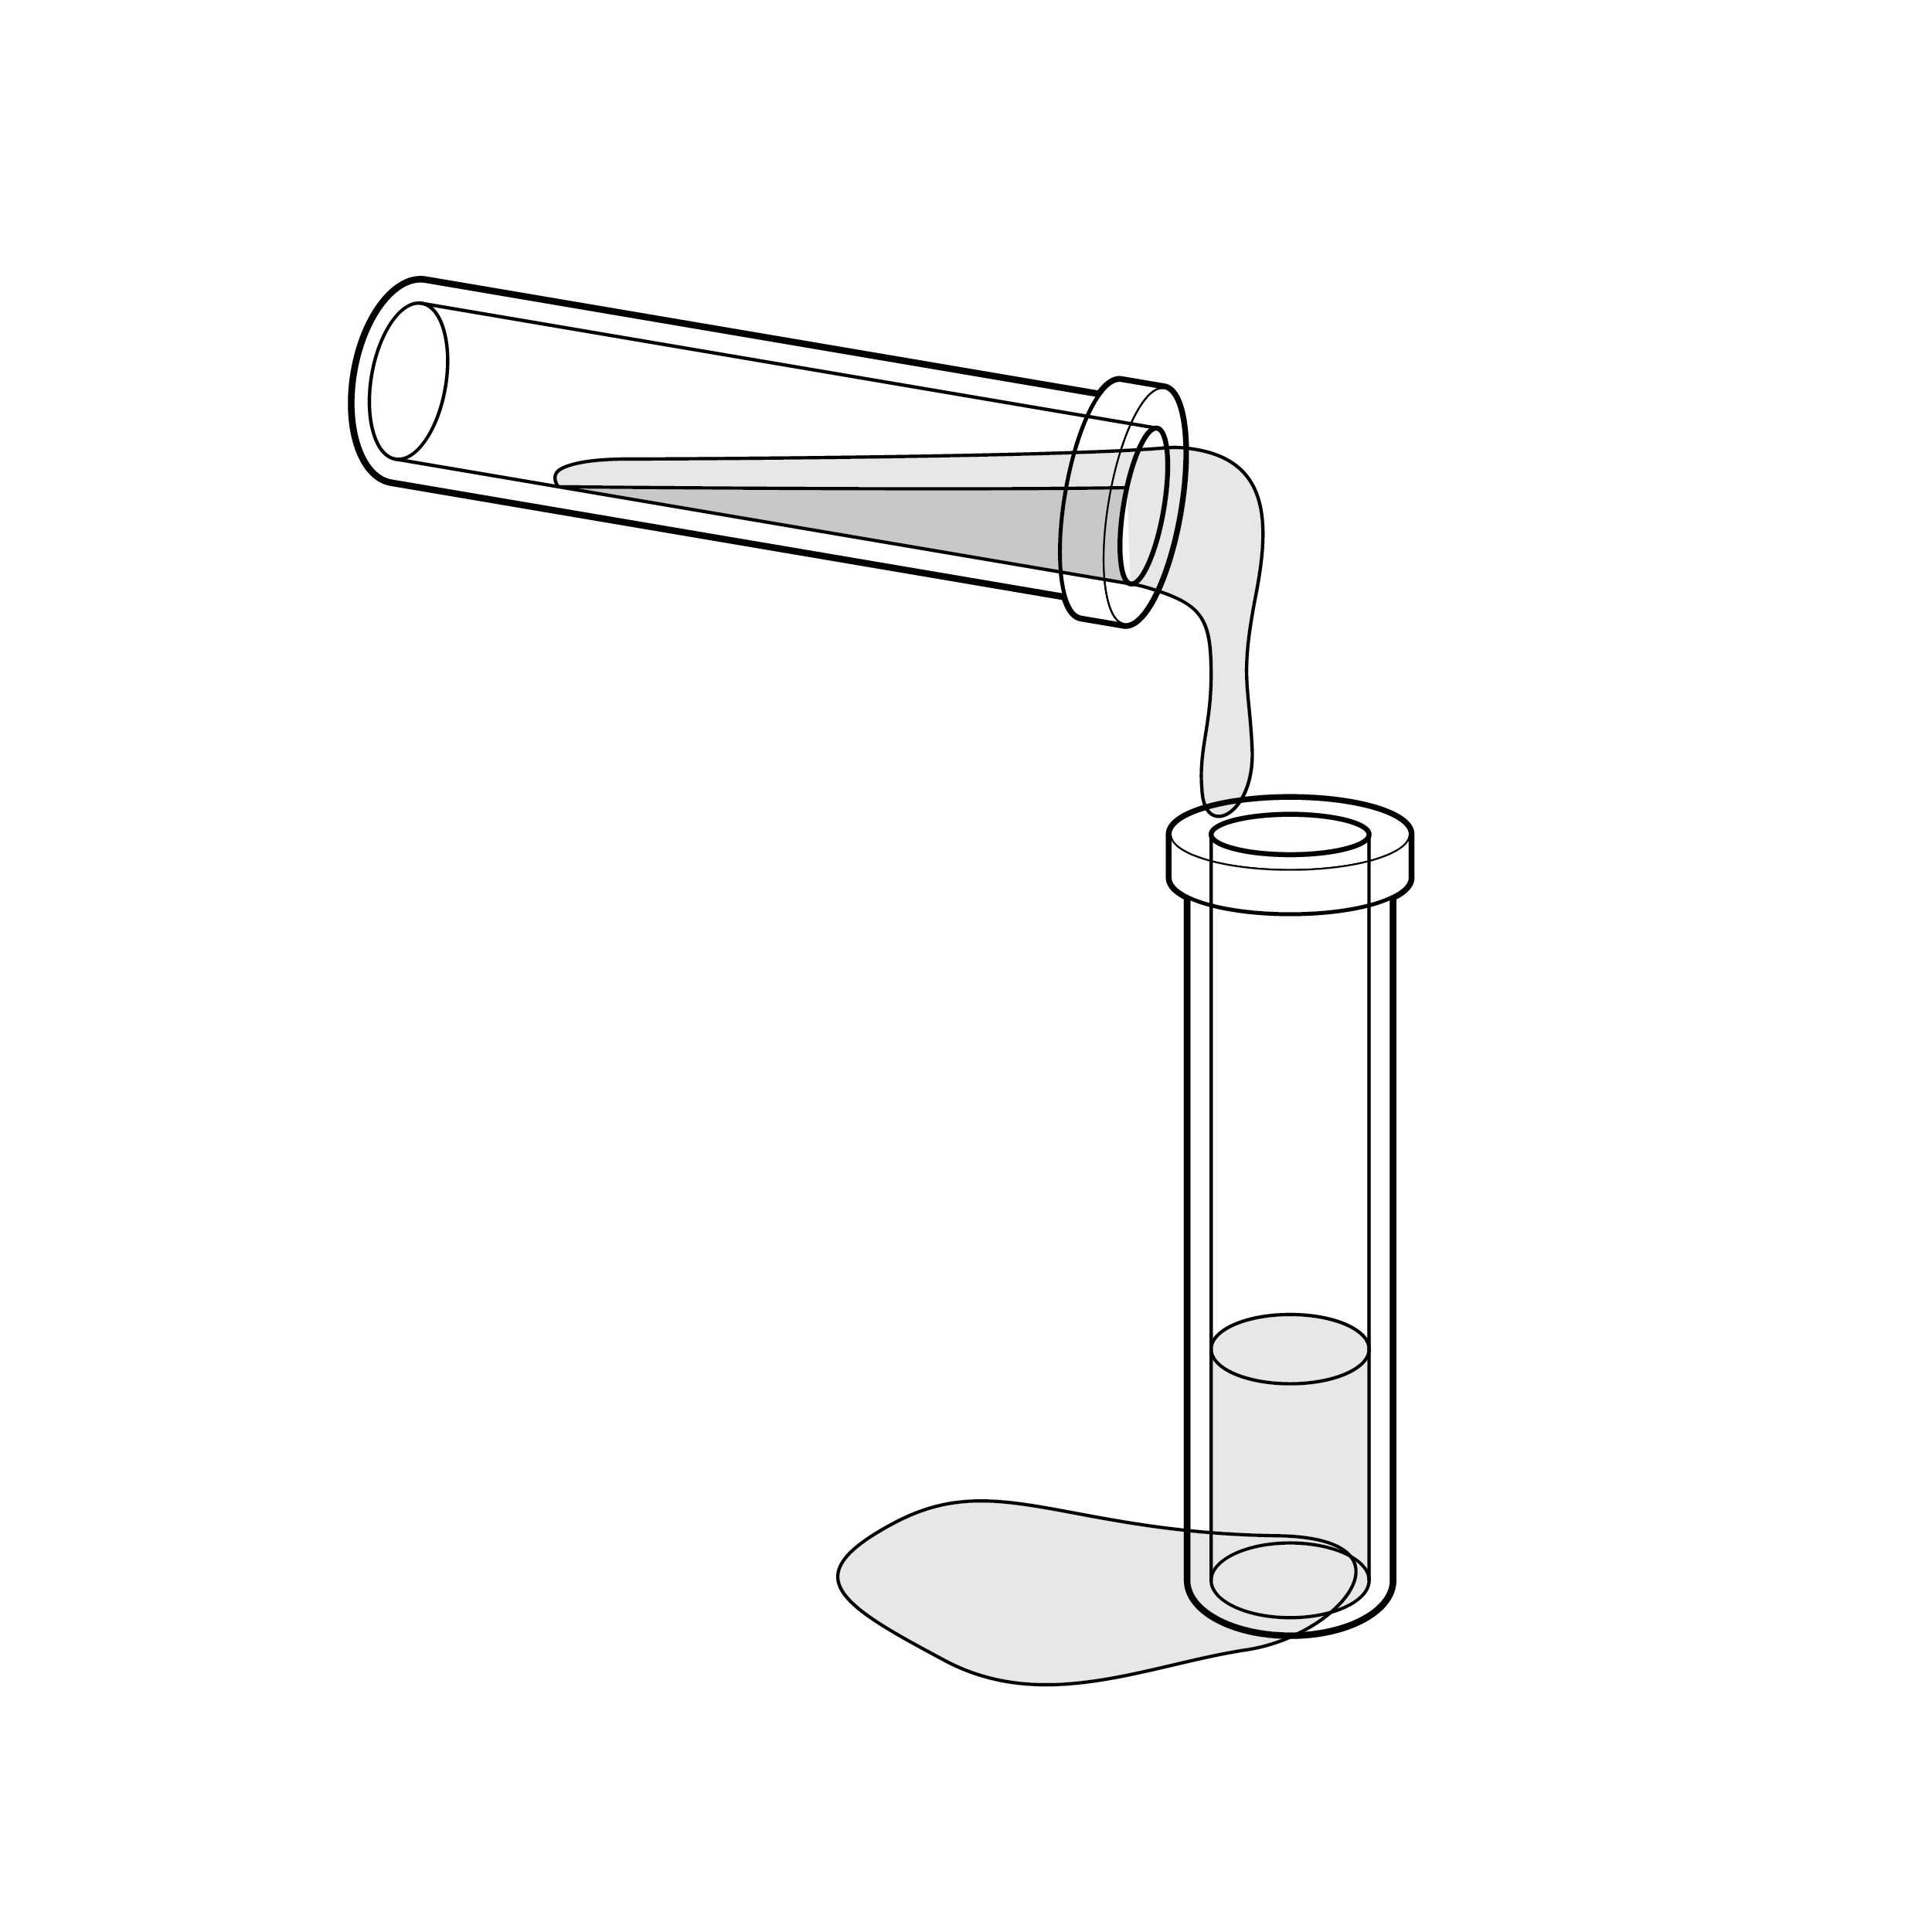 Fluid is pouring from one cylindrical vial into another. Fluid around the base of the second vial indicates the fluid has spilled.